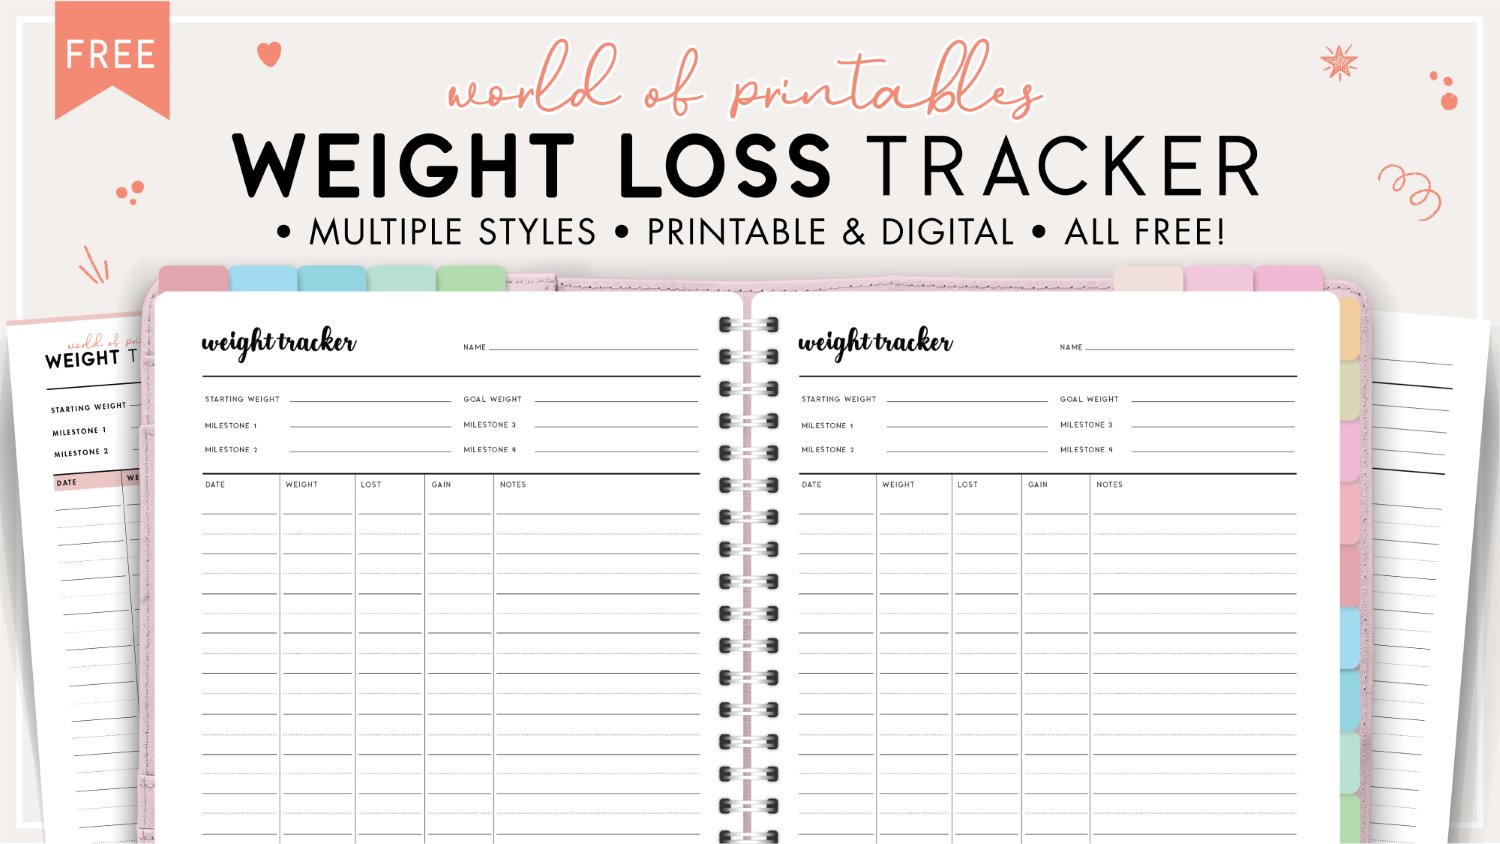 Printable Body Tracker: Your Personalized Guide to a Healthier You post thumbnail image